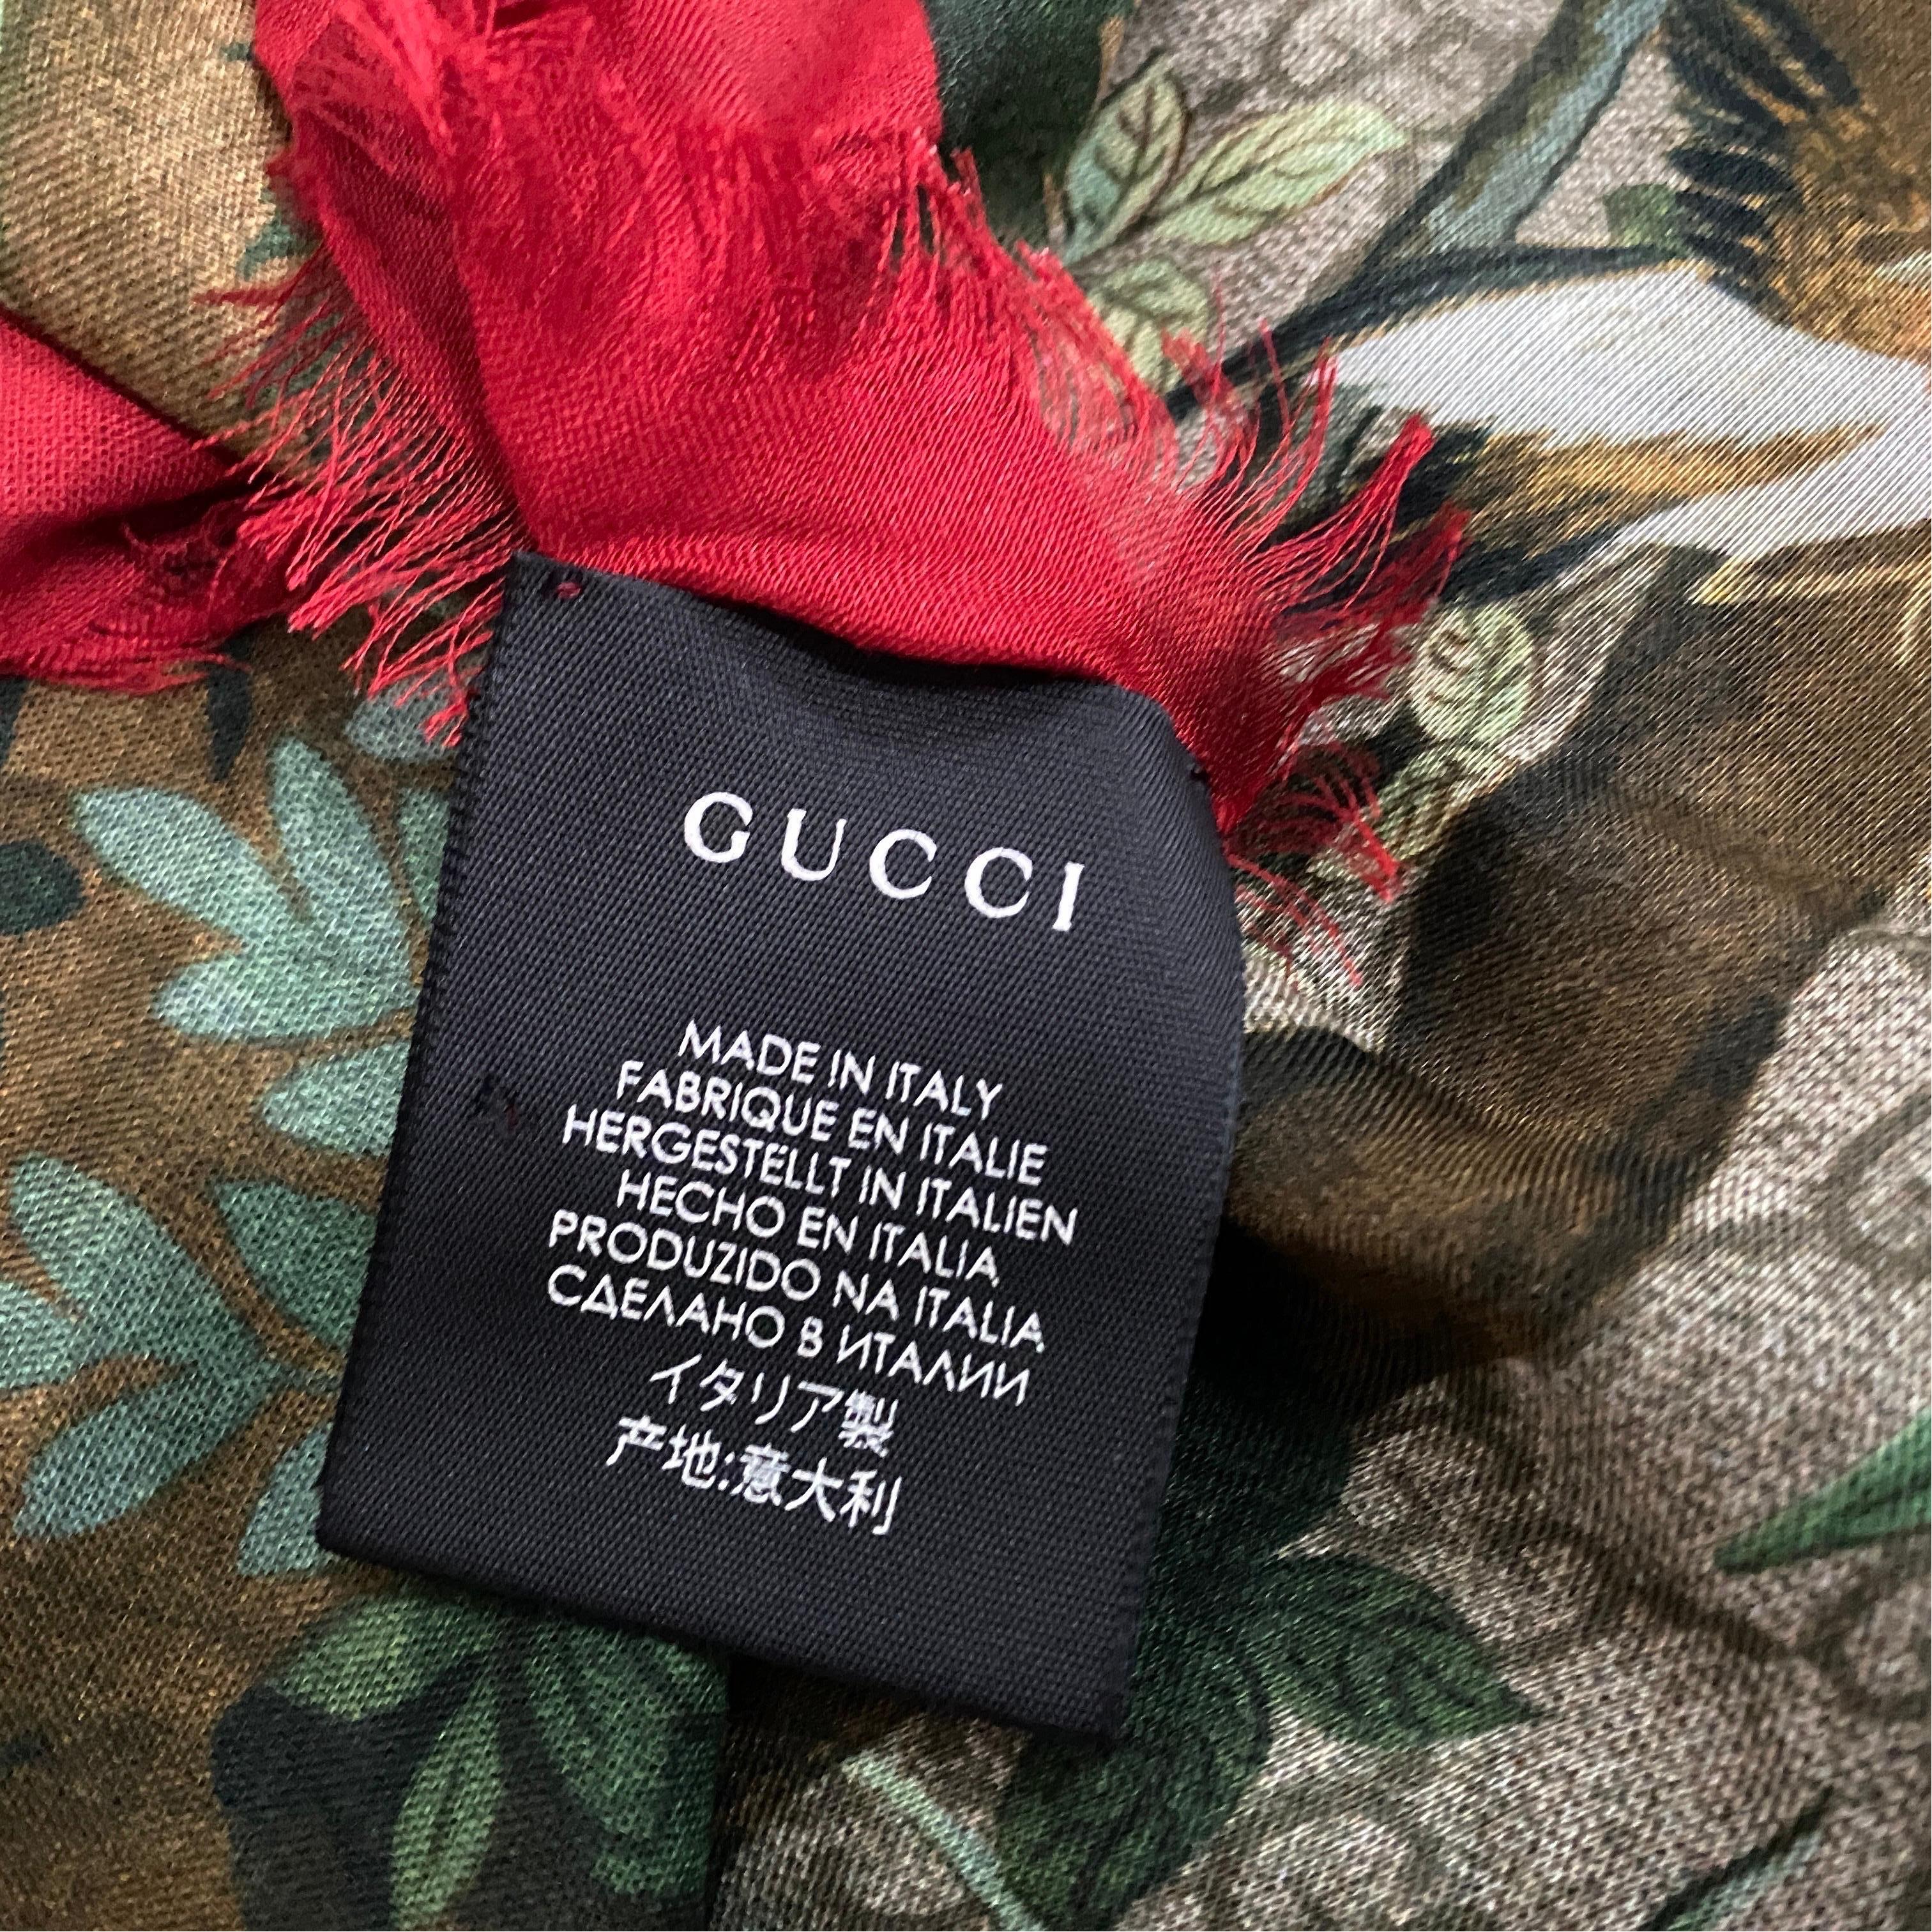 An Iconic Wool and Silk Flora and Fauna Italian Scarf by Gucci For Sale ...